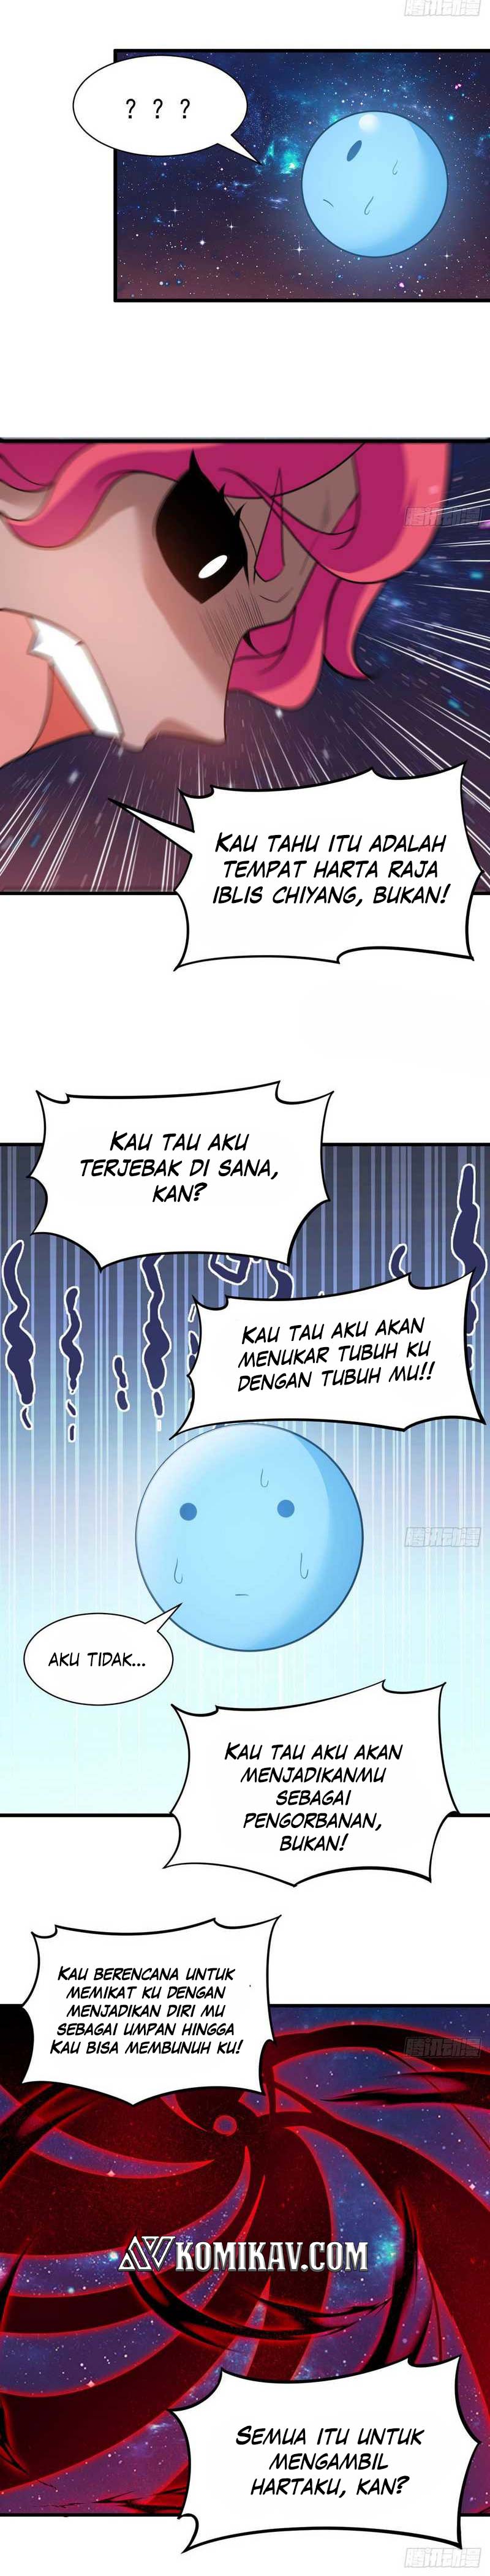 Dilarang COPAS - situs resmi www.mangacanblog.com - Komik i just want to be beaten to death by everyone 098 - chapter 98 99 Indonesia i just want to be beaten to death by everyone 098 - chapter 98 Terbaru 9|Baca Manga Komik Indonesia|Mangacan